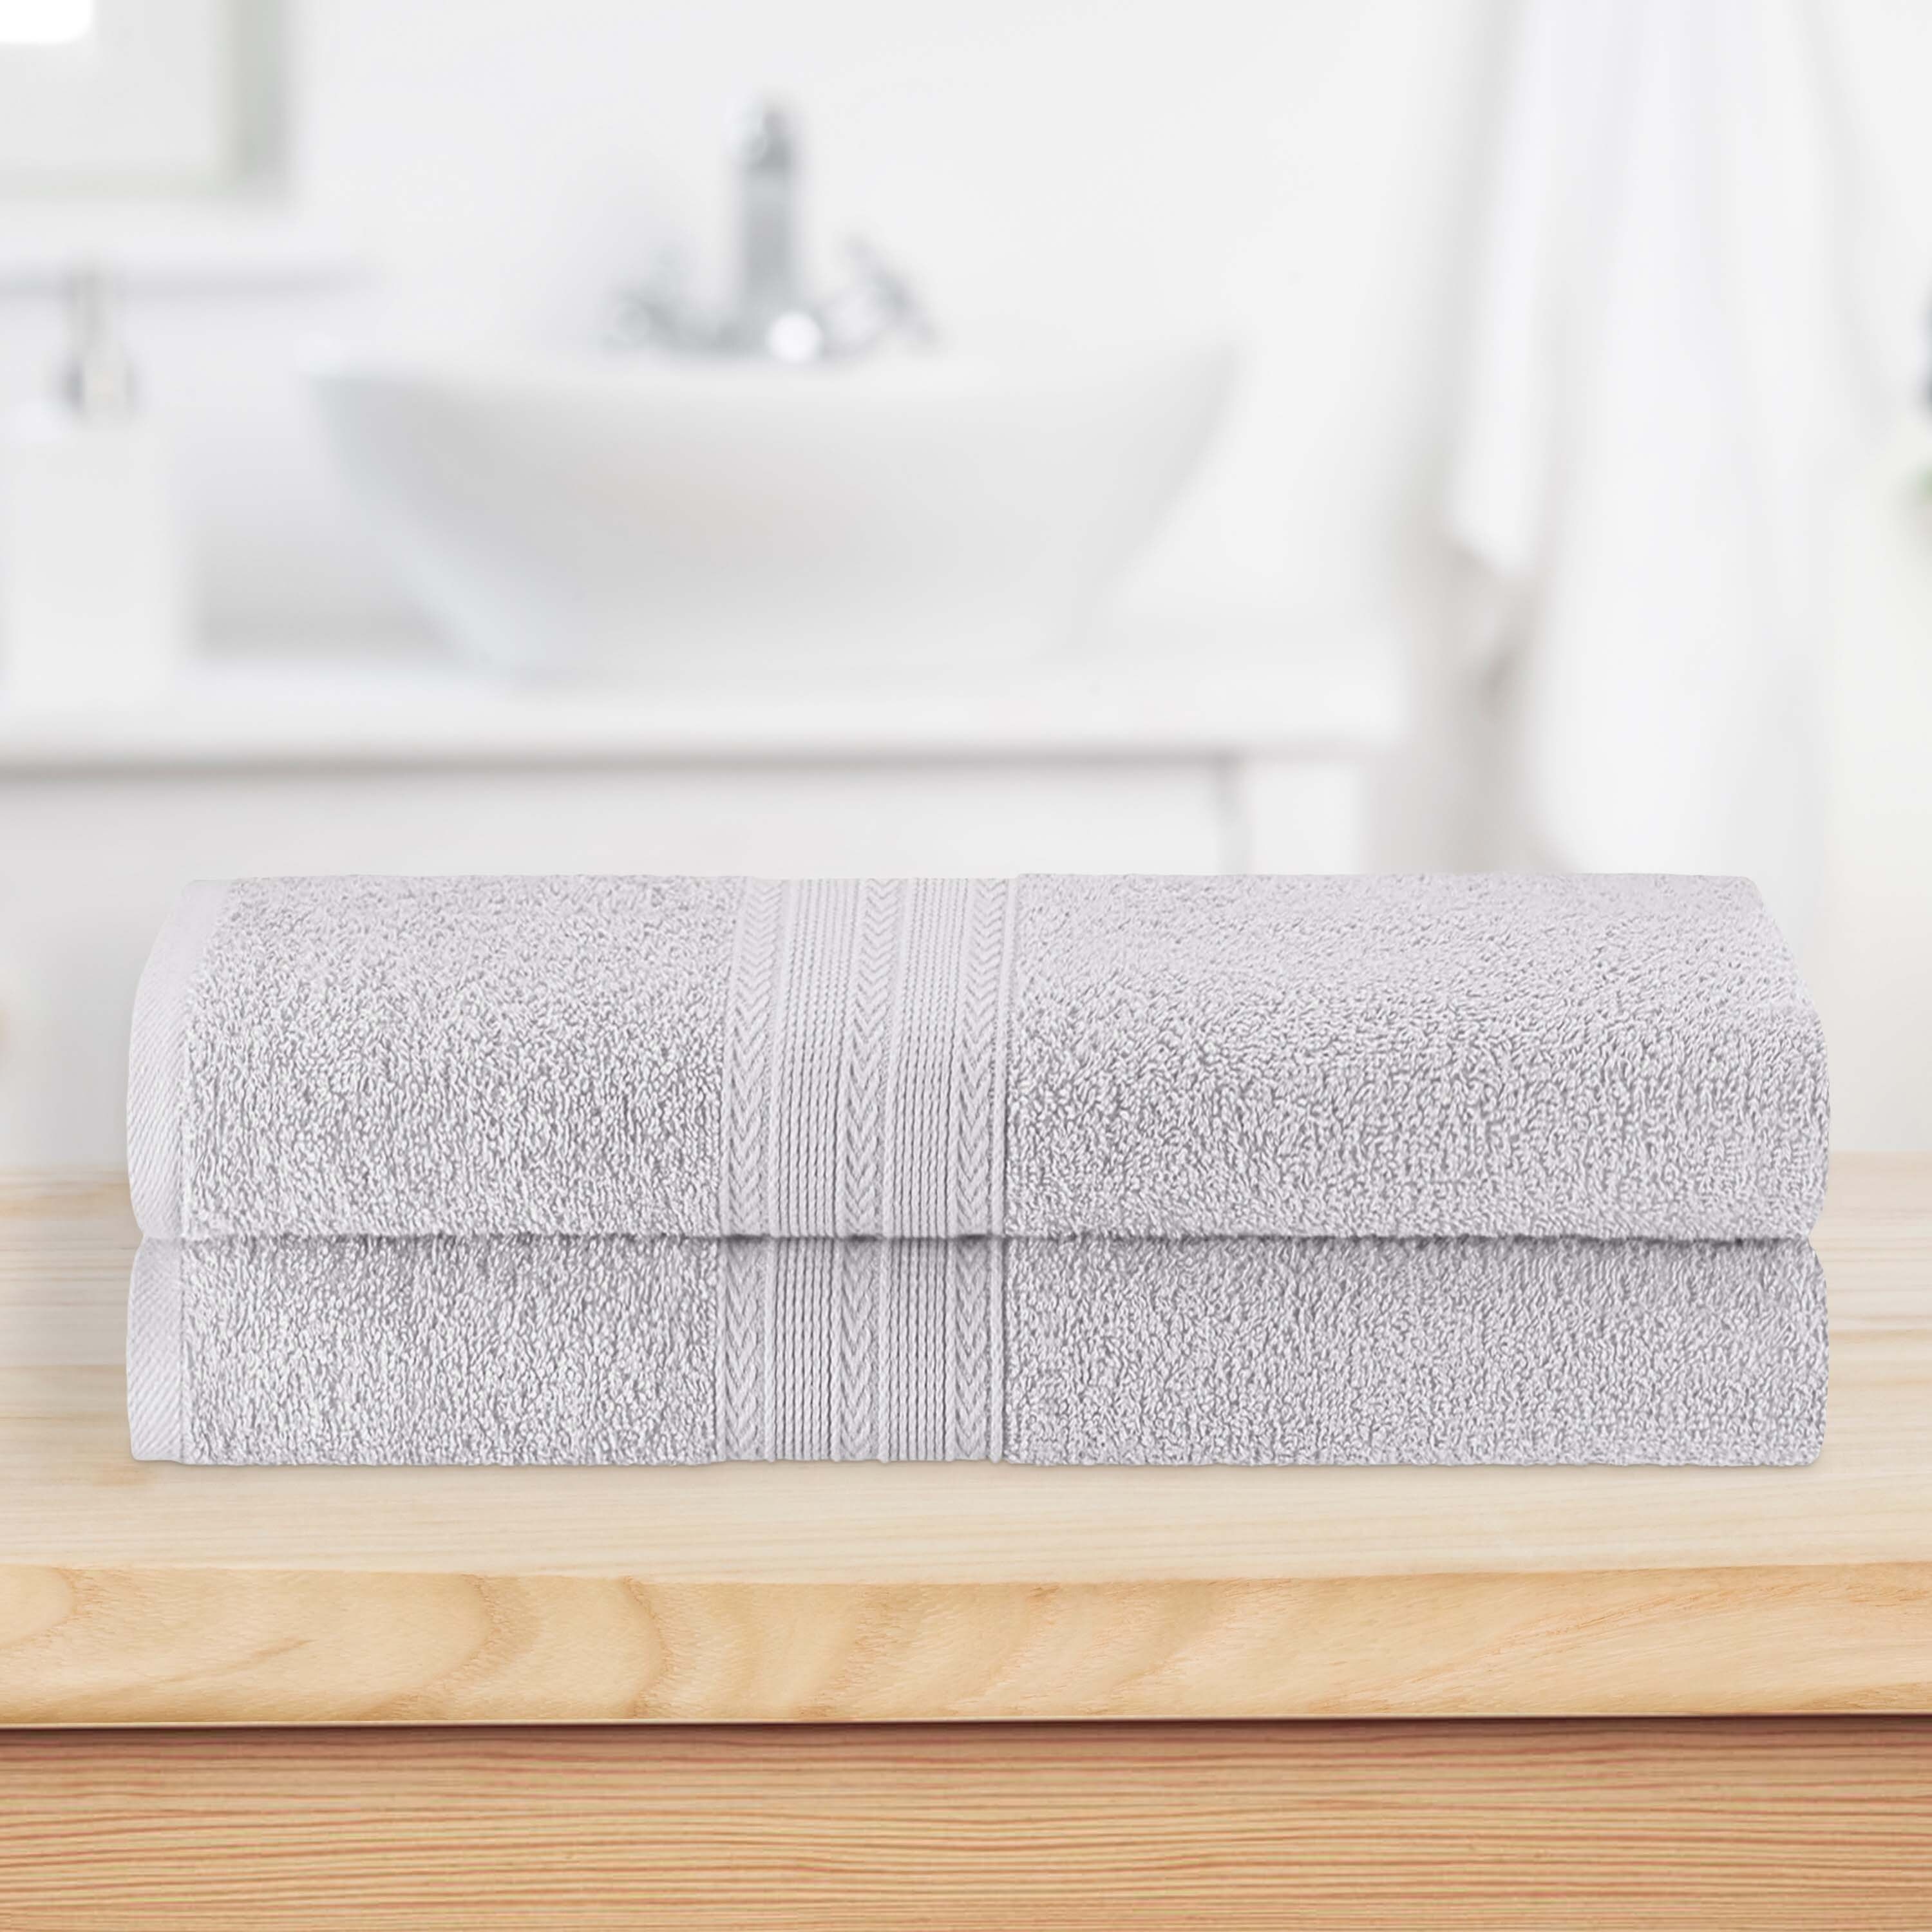 https://ak1.ostkcdn.com/images/products/is/images/direct/ca6475958b3ceeb0e29f1b6ab23afe35a92fbc6a/Eco-Friendly-Sustainable-Cotton-Bath-Sheet-Set-of-2-by-Superior.jpg